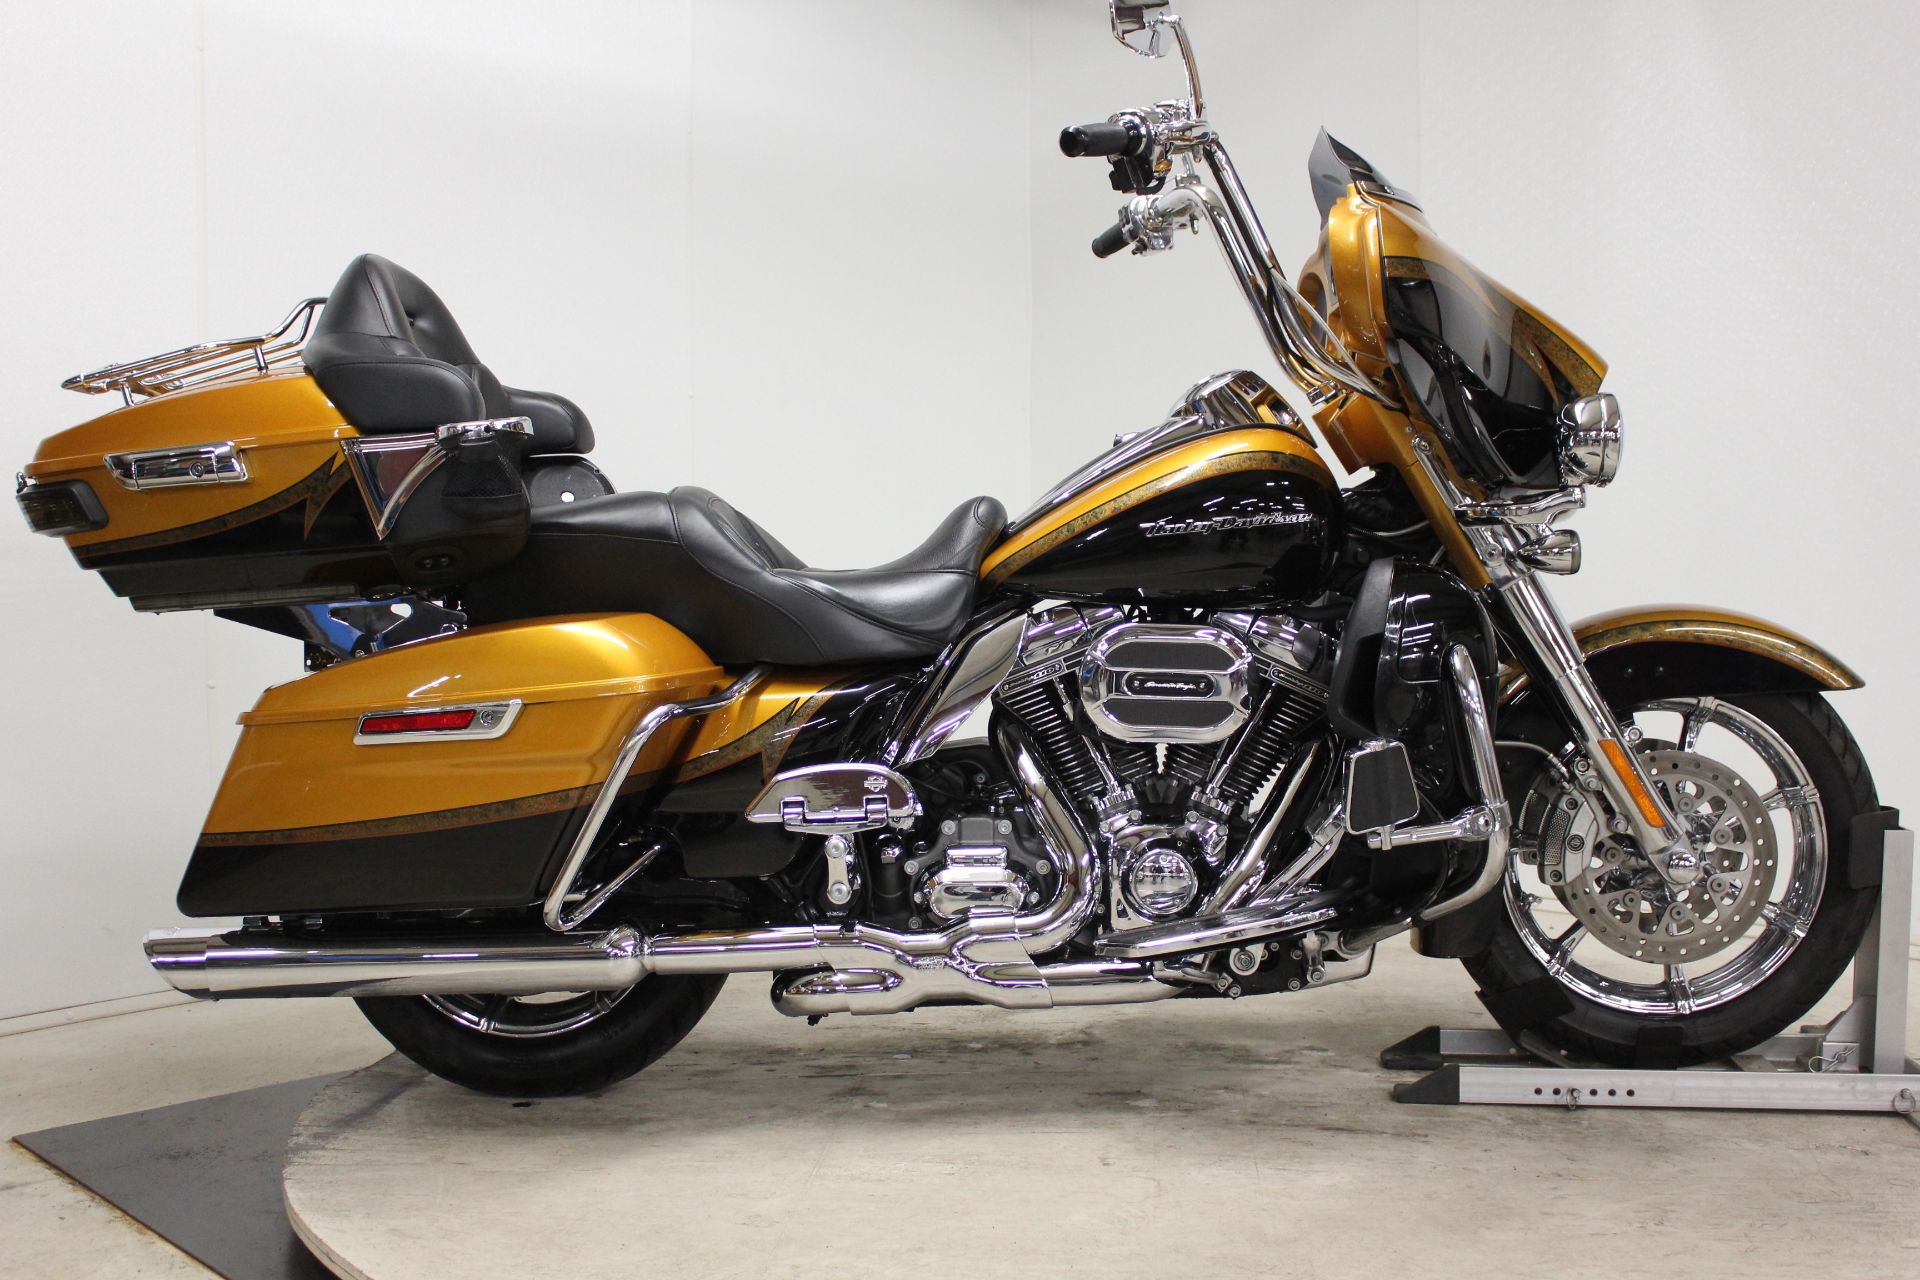 Used 2015 Harley Davidson Cvo Limited Gold Rush Carbon Dust Motorcycles In Pittsfield Ma 957077